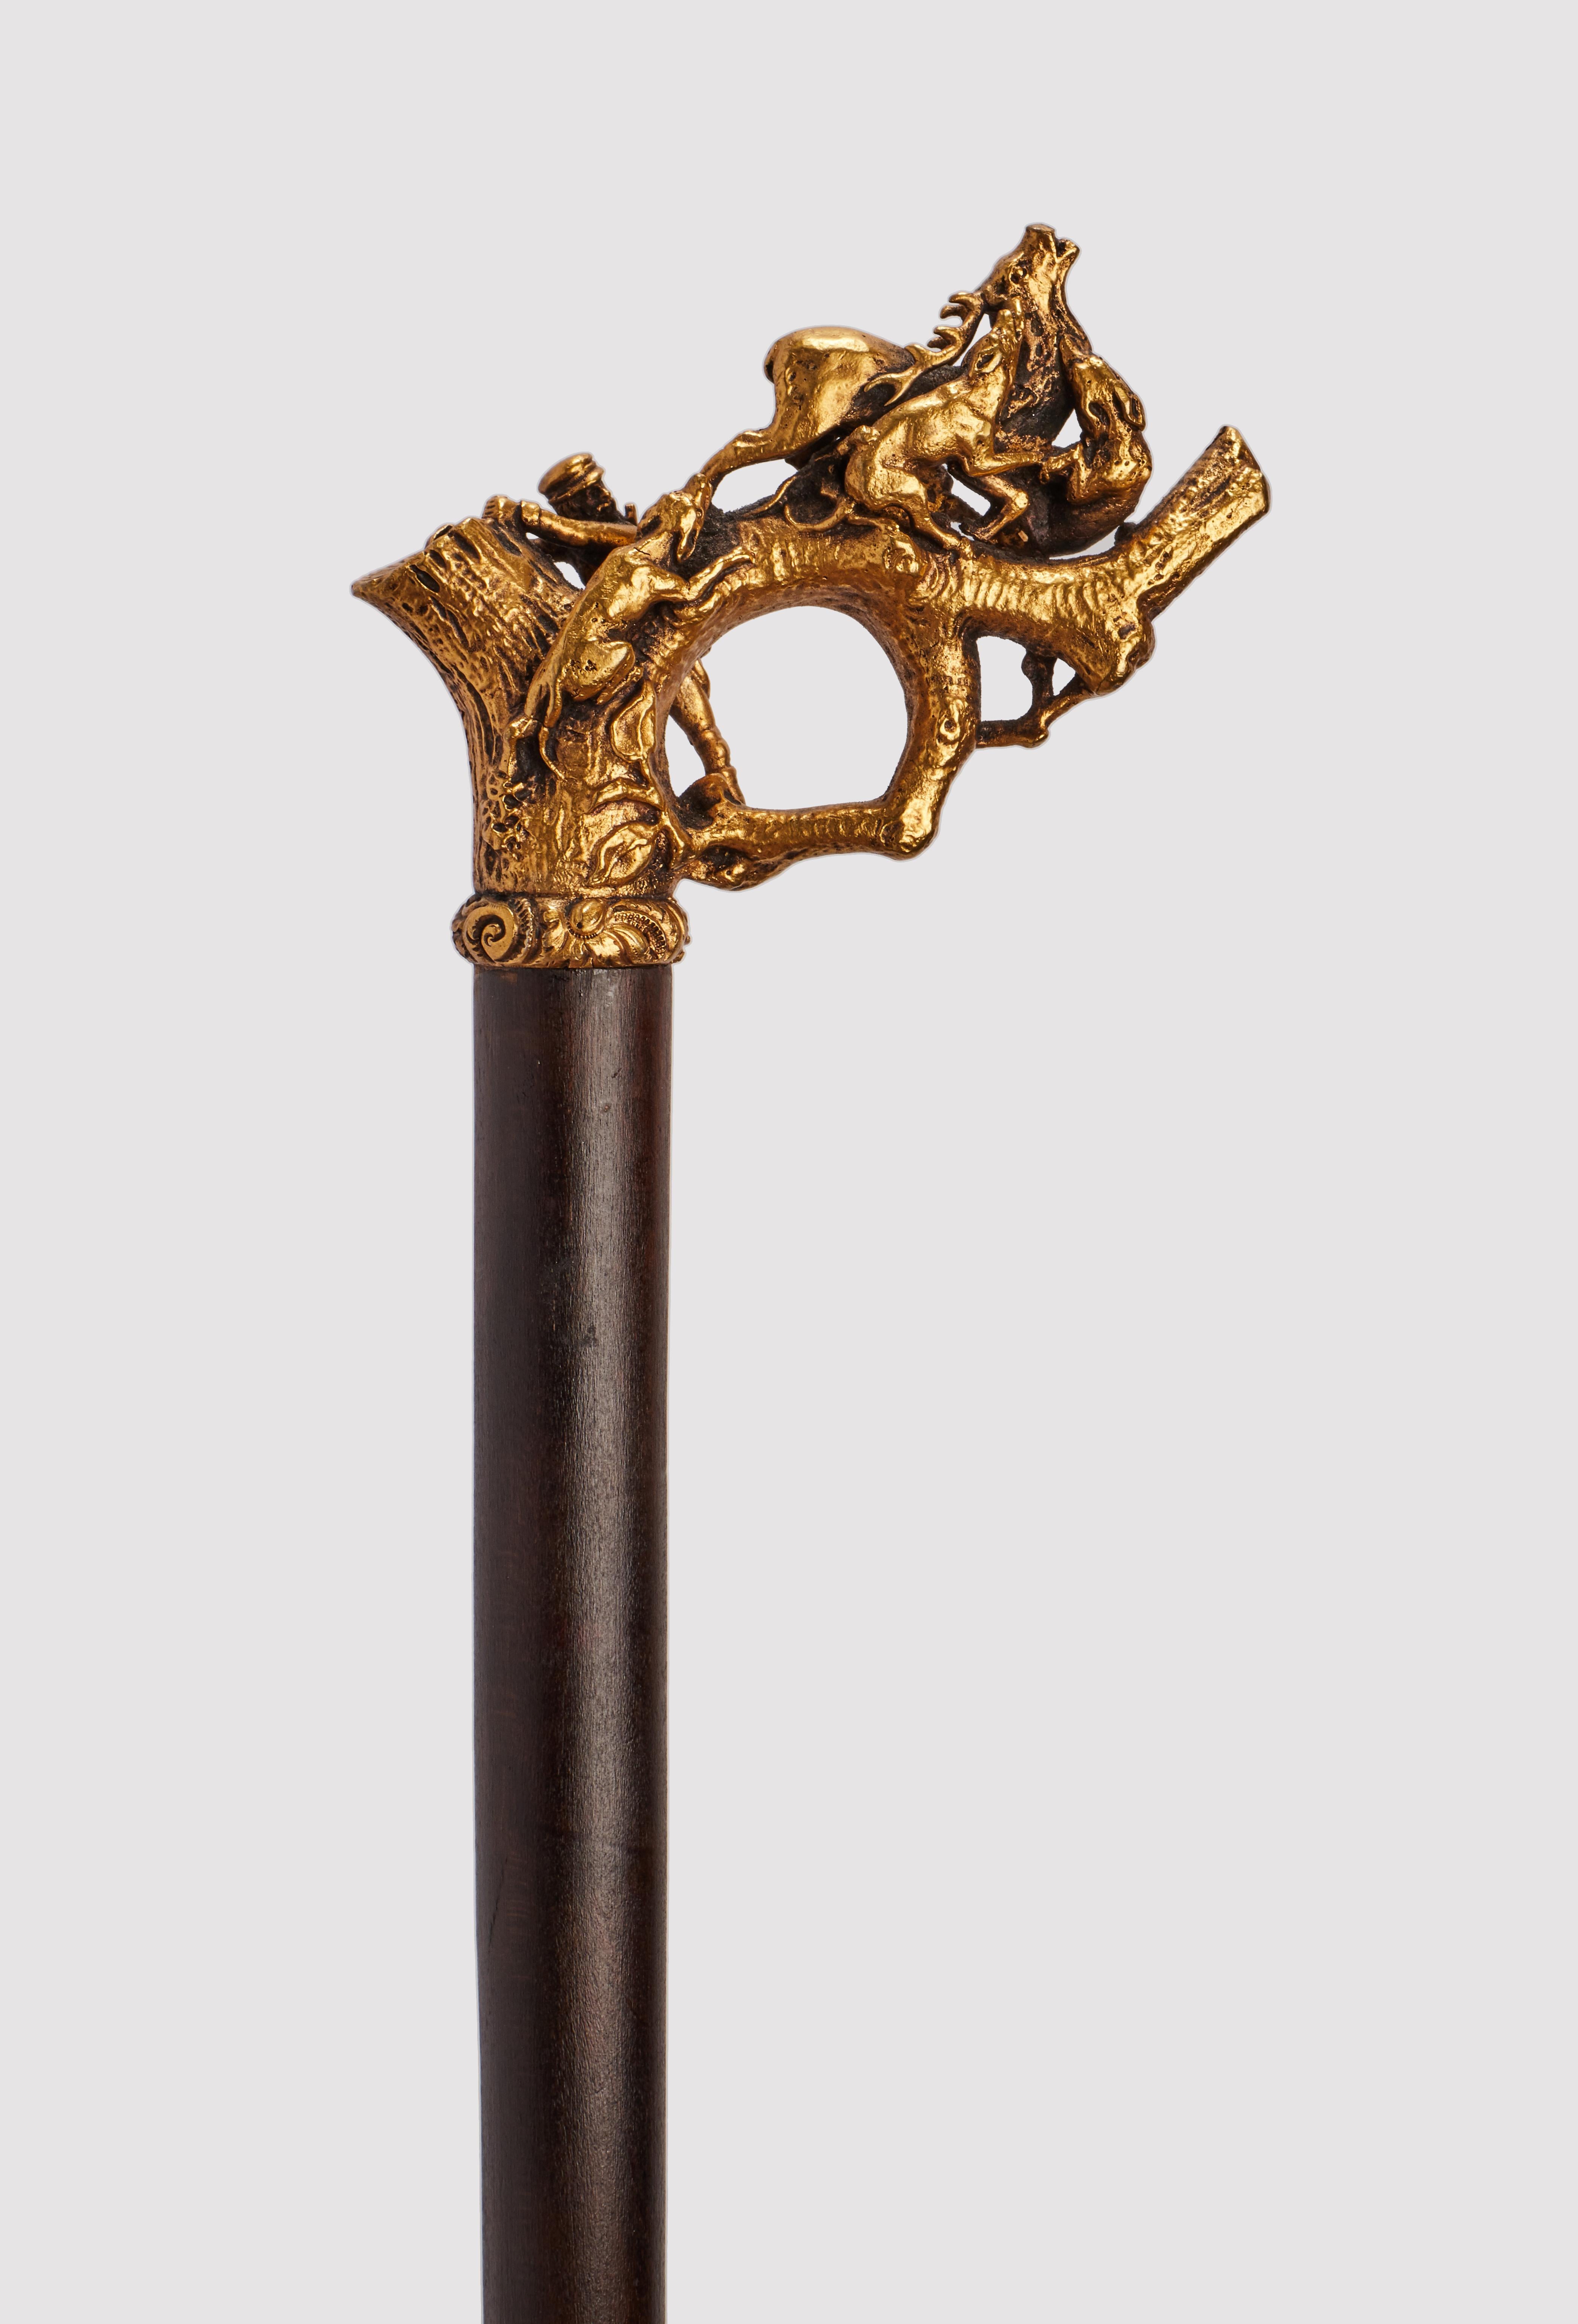 Walking stick: handle, made out of silver gilt representing an hunting scene, with hunter and dogs. Ebony wood shaft. Metal ferrule. Germany circa 1890.